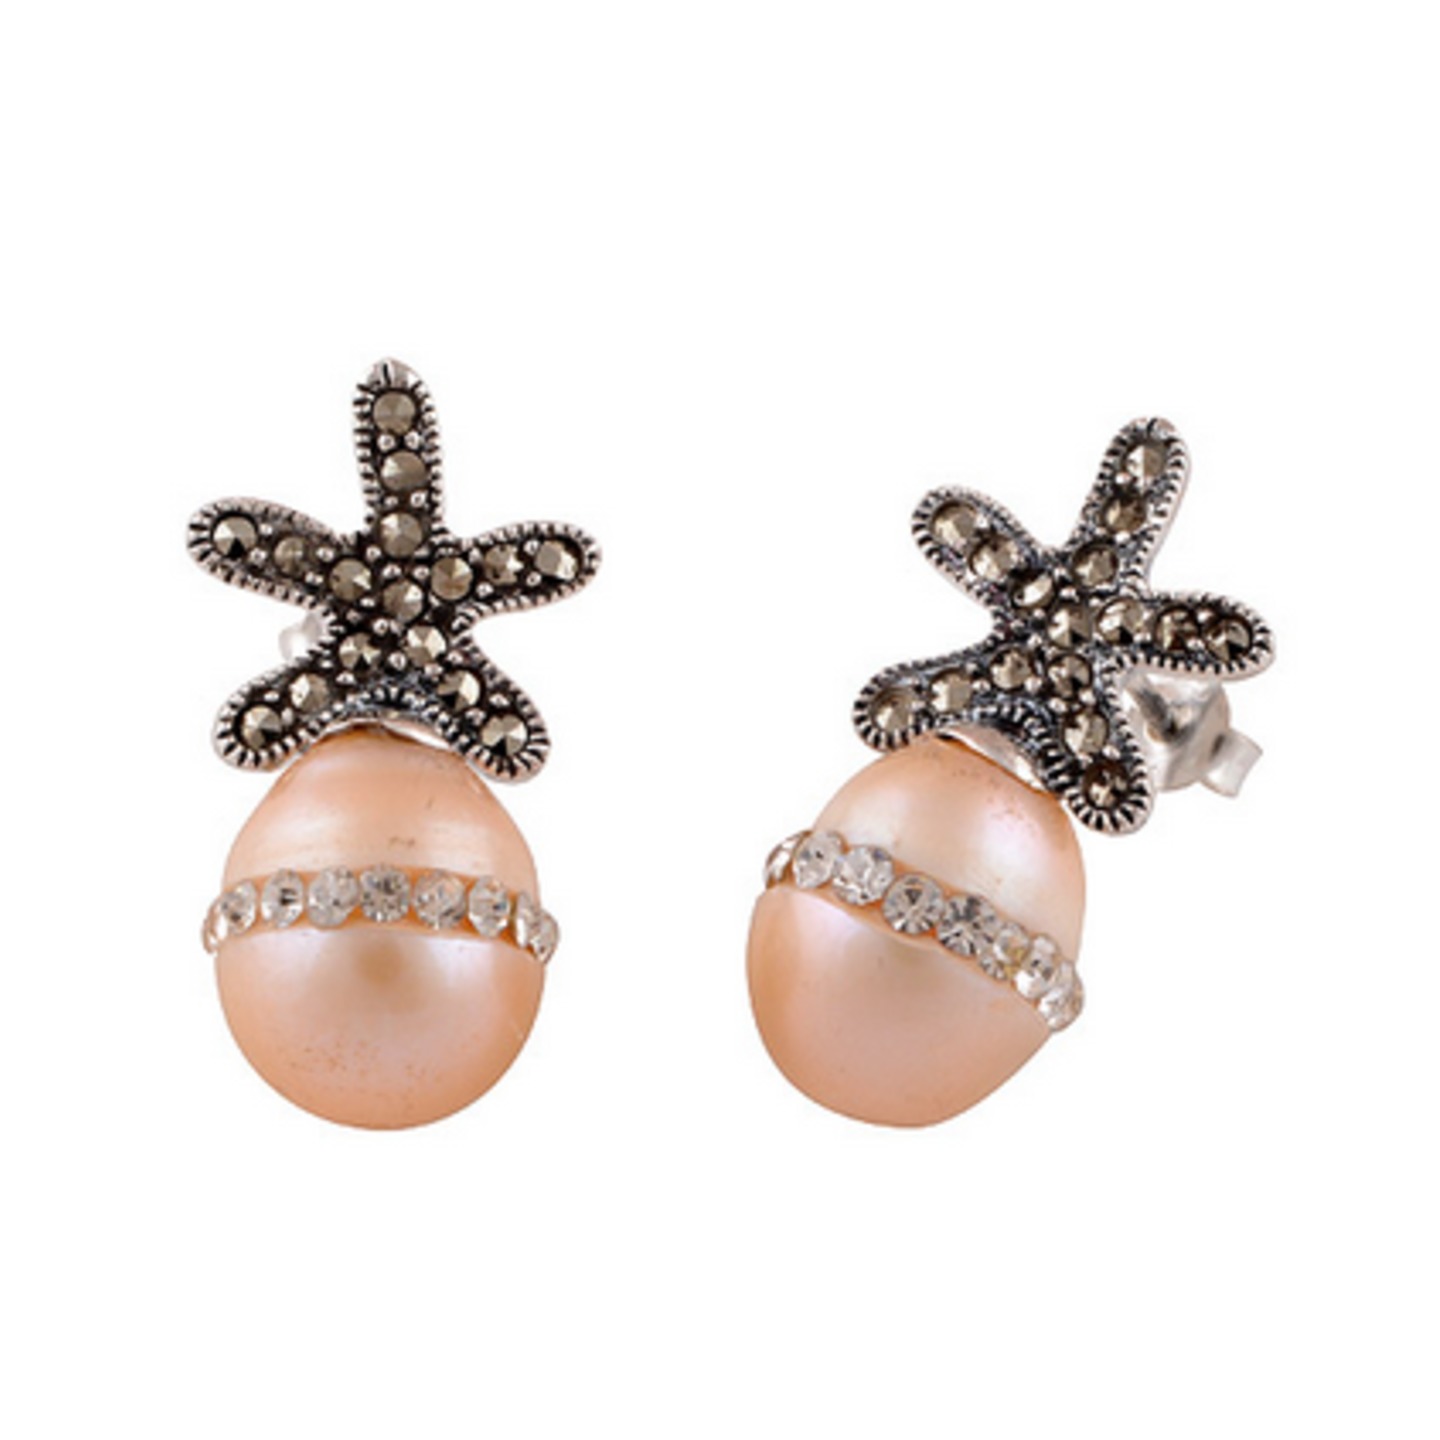 The Starfish Pearl Marcasite Silver Earrings